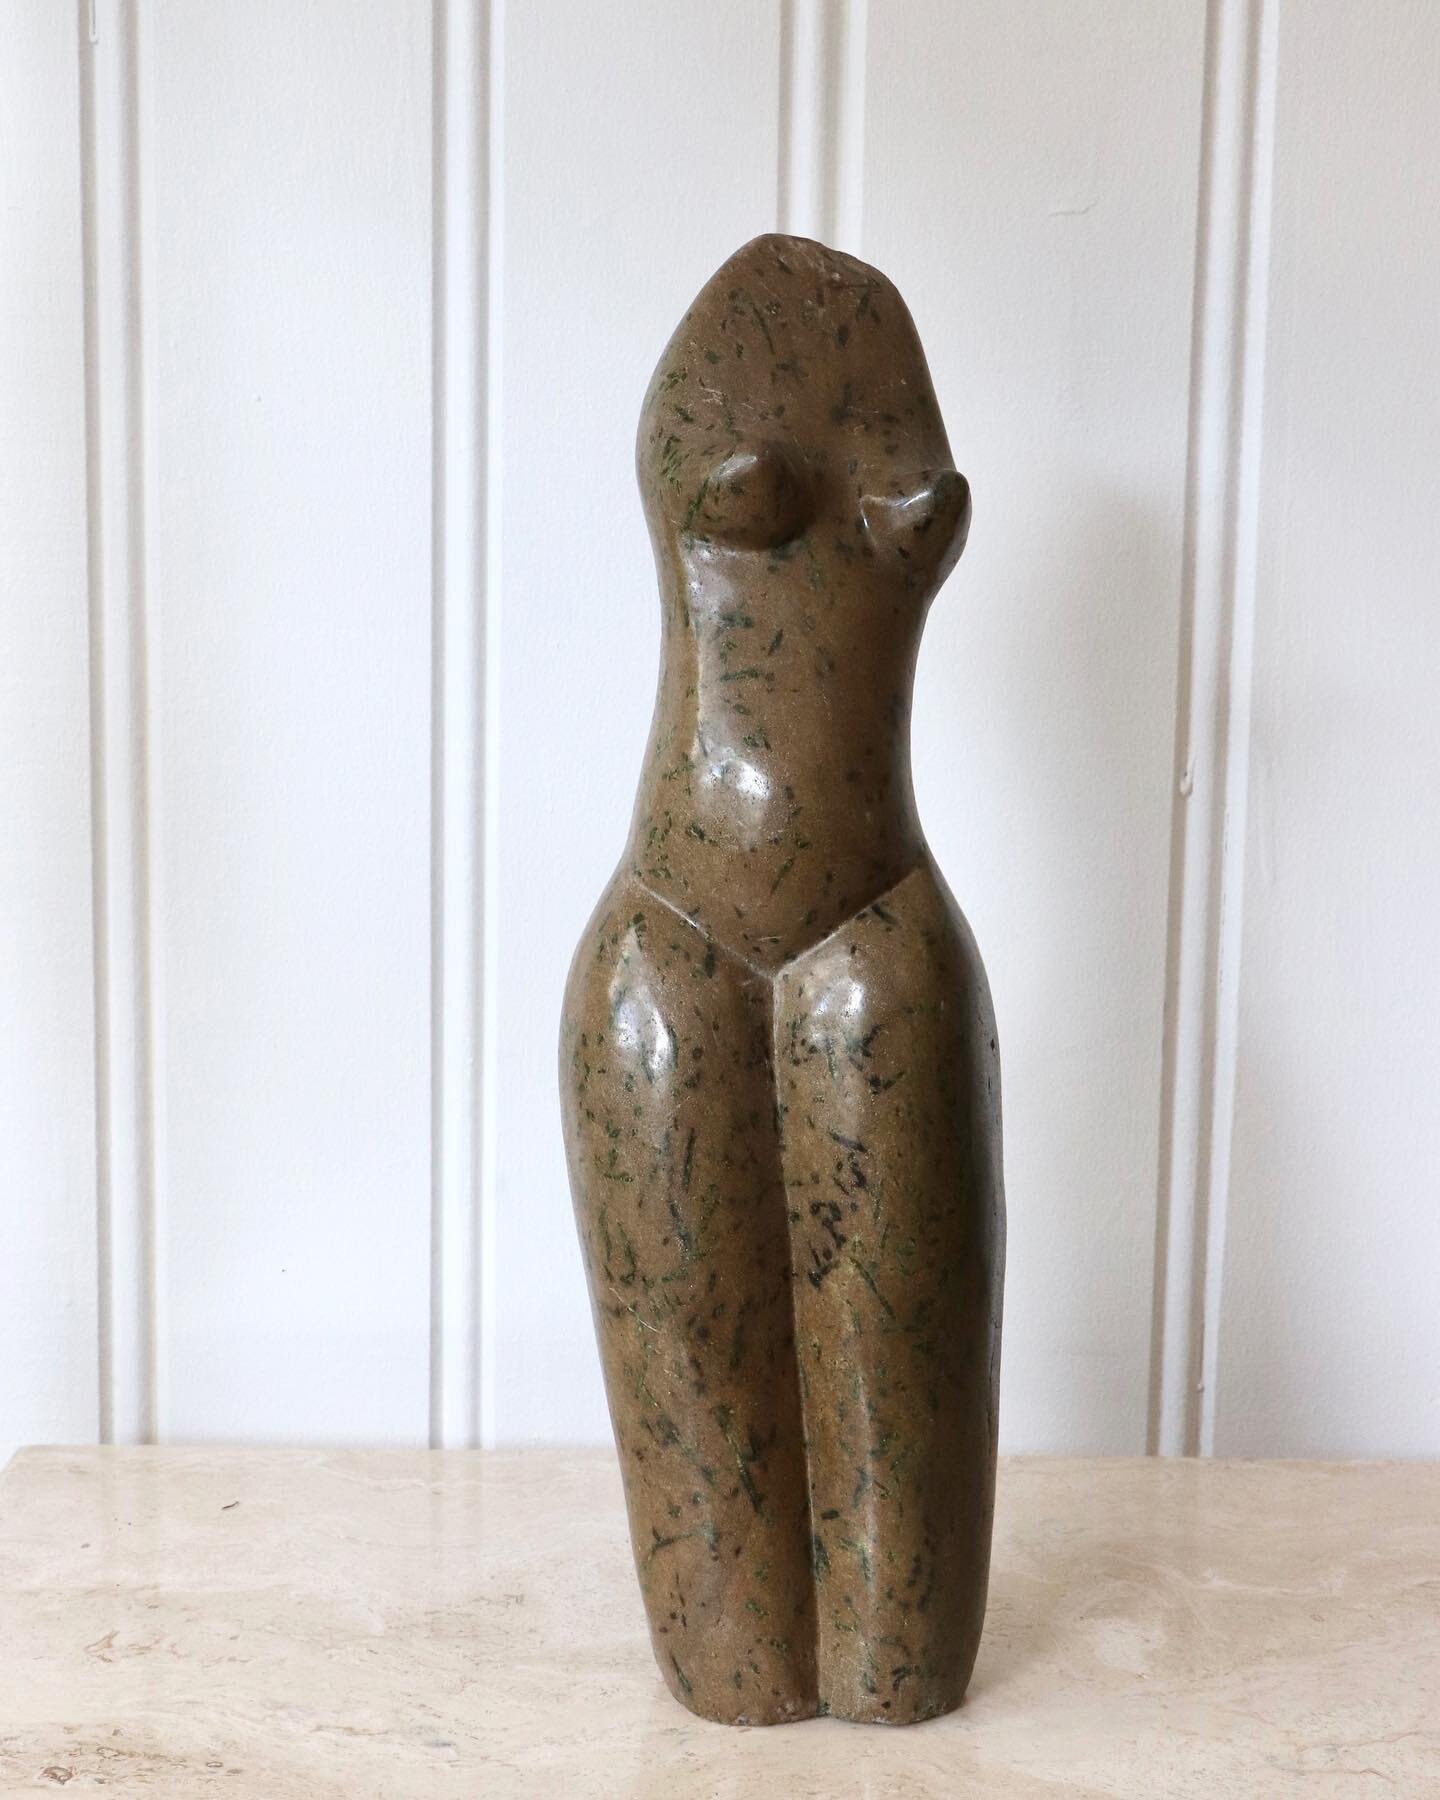 Large soapstone female torso sculpture measuring 18 inches tall. Can be style in a variety of ways. In great condition. $655 

#interiordesign #homedecor #art #vintage